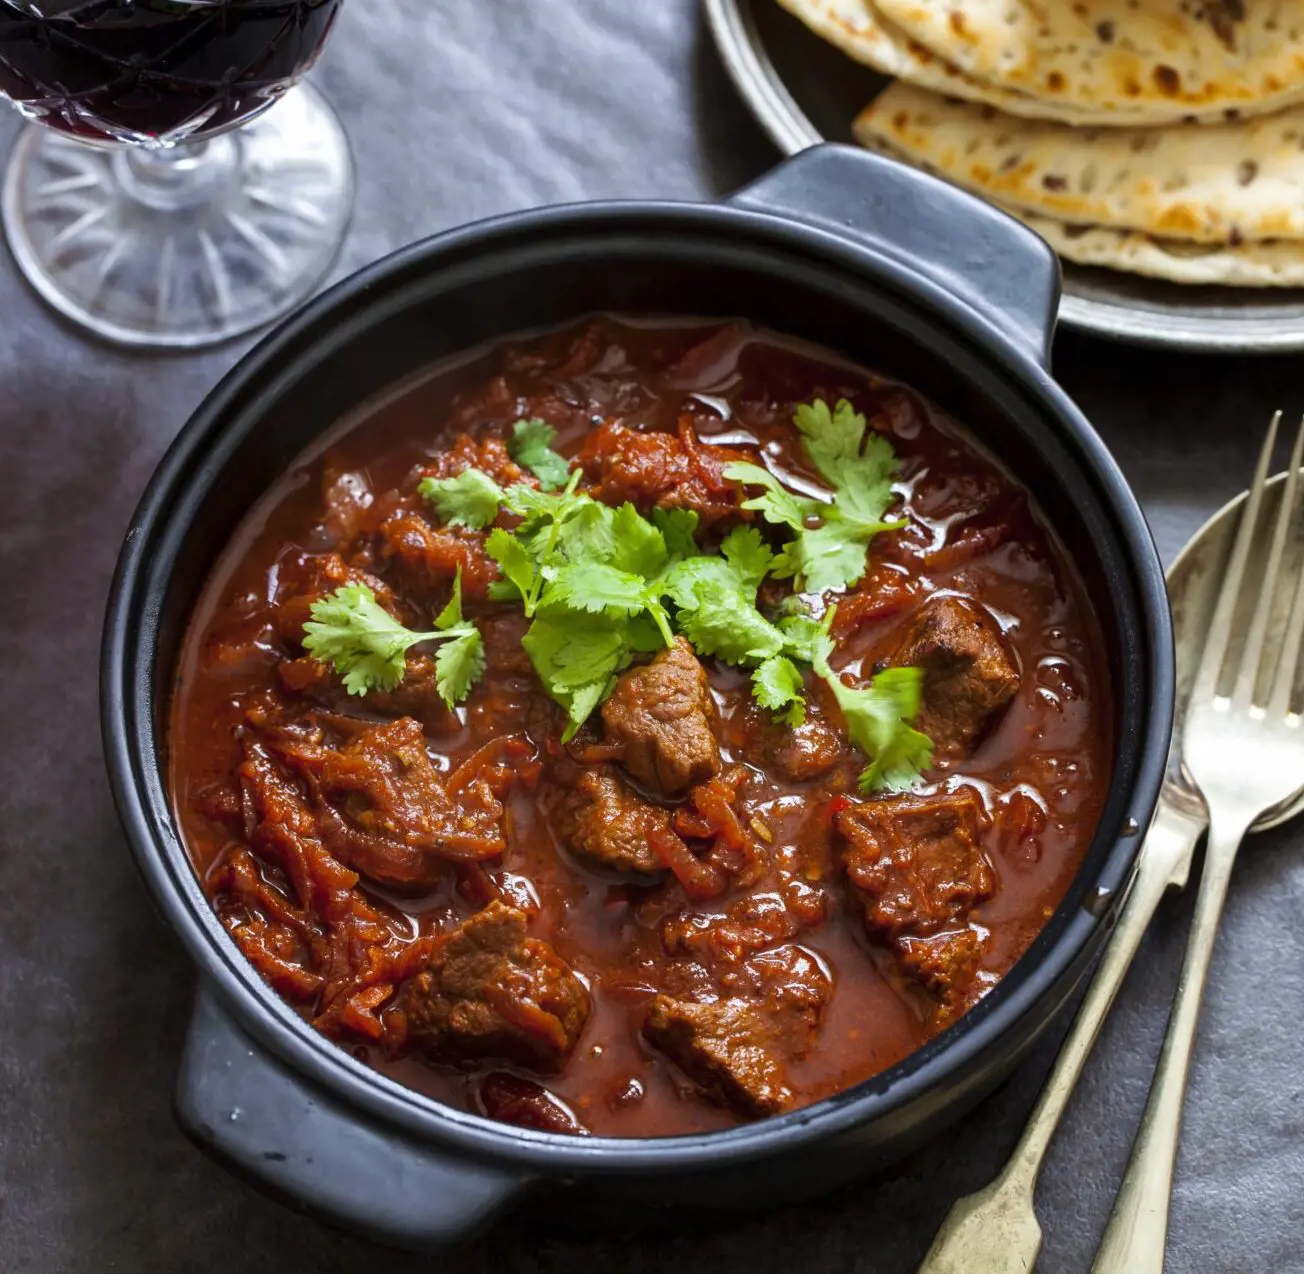 Pork Vindaloo is one of the spiciest dishes in India